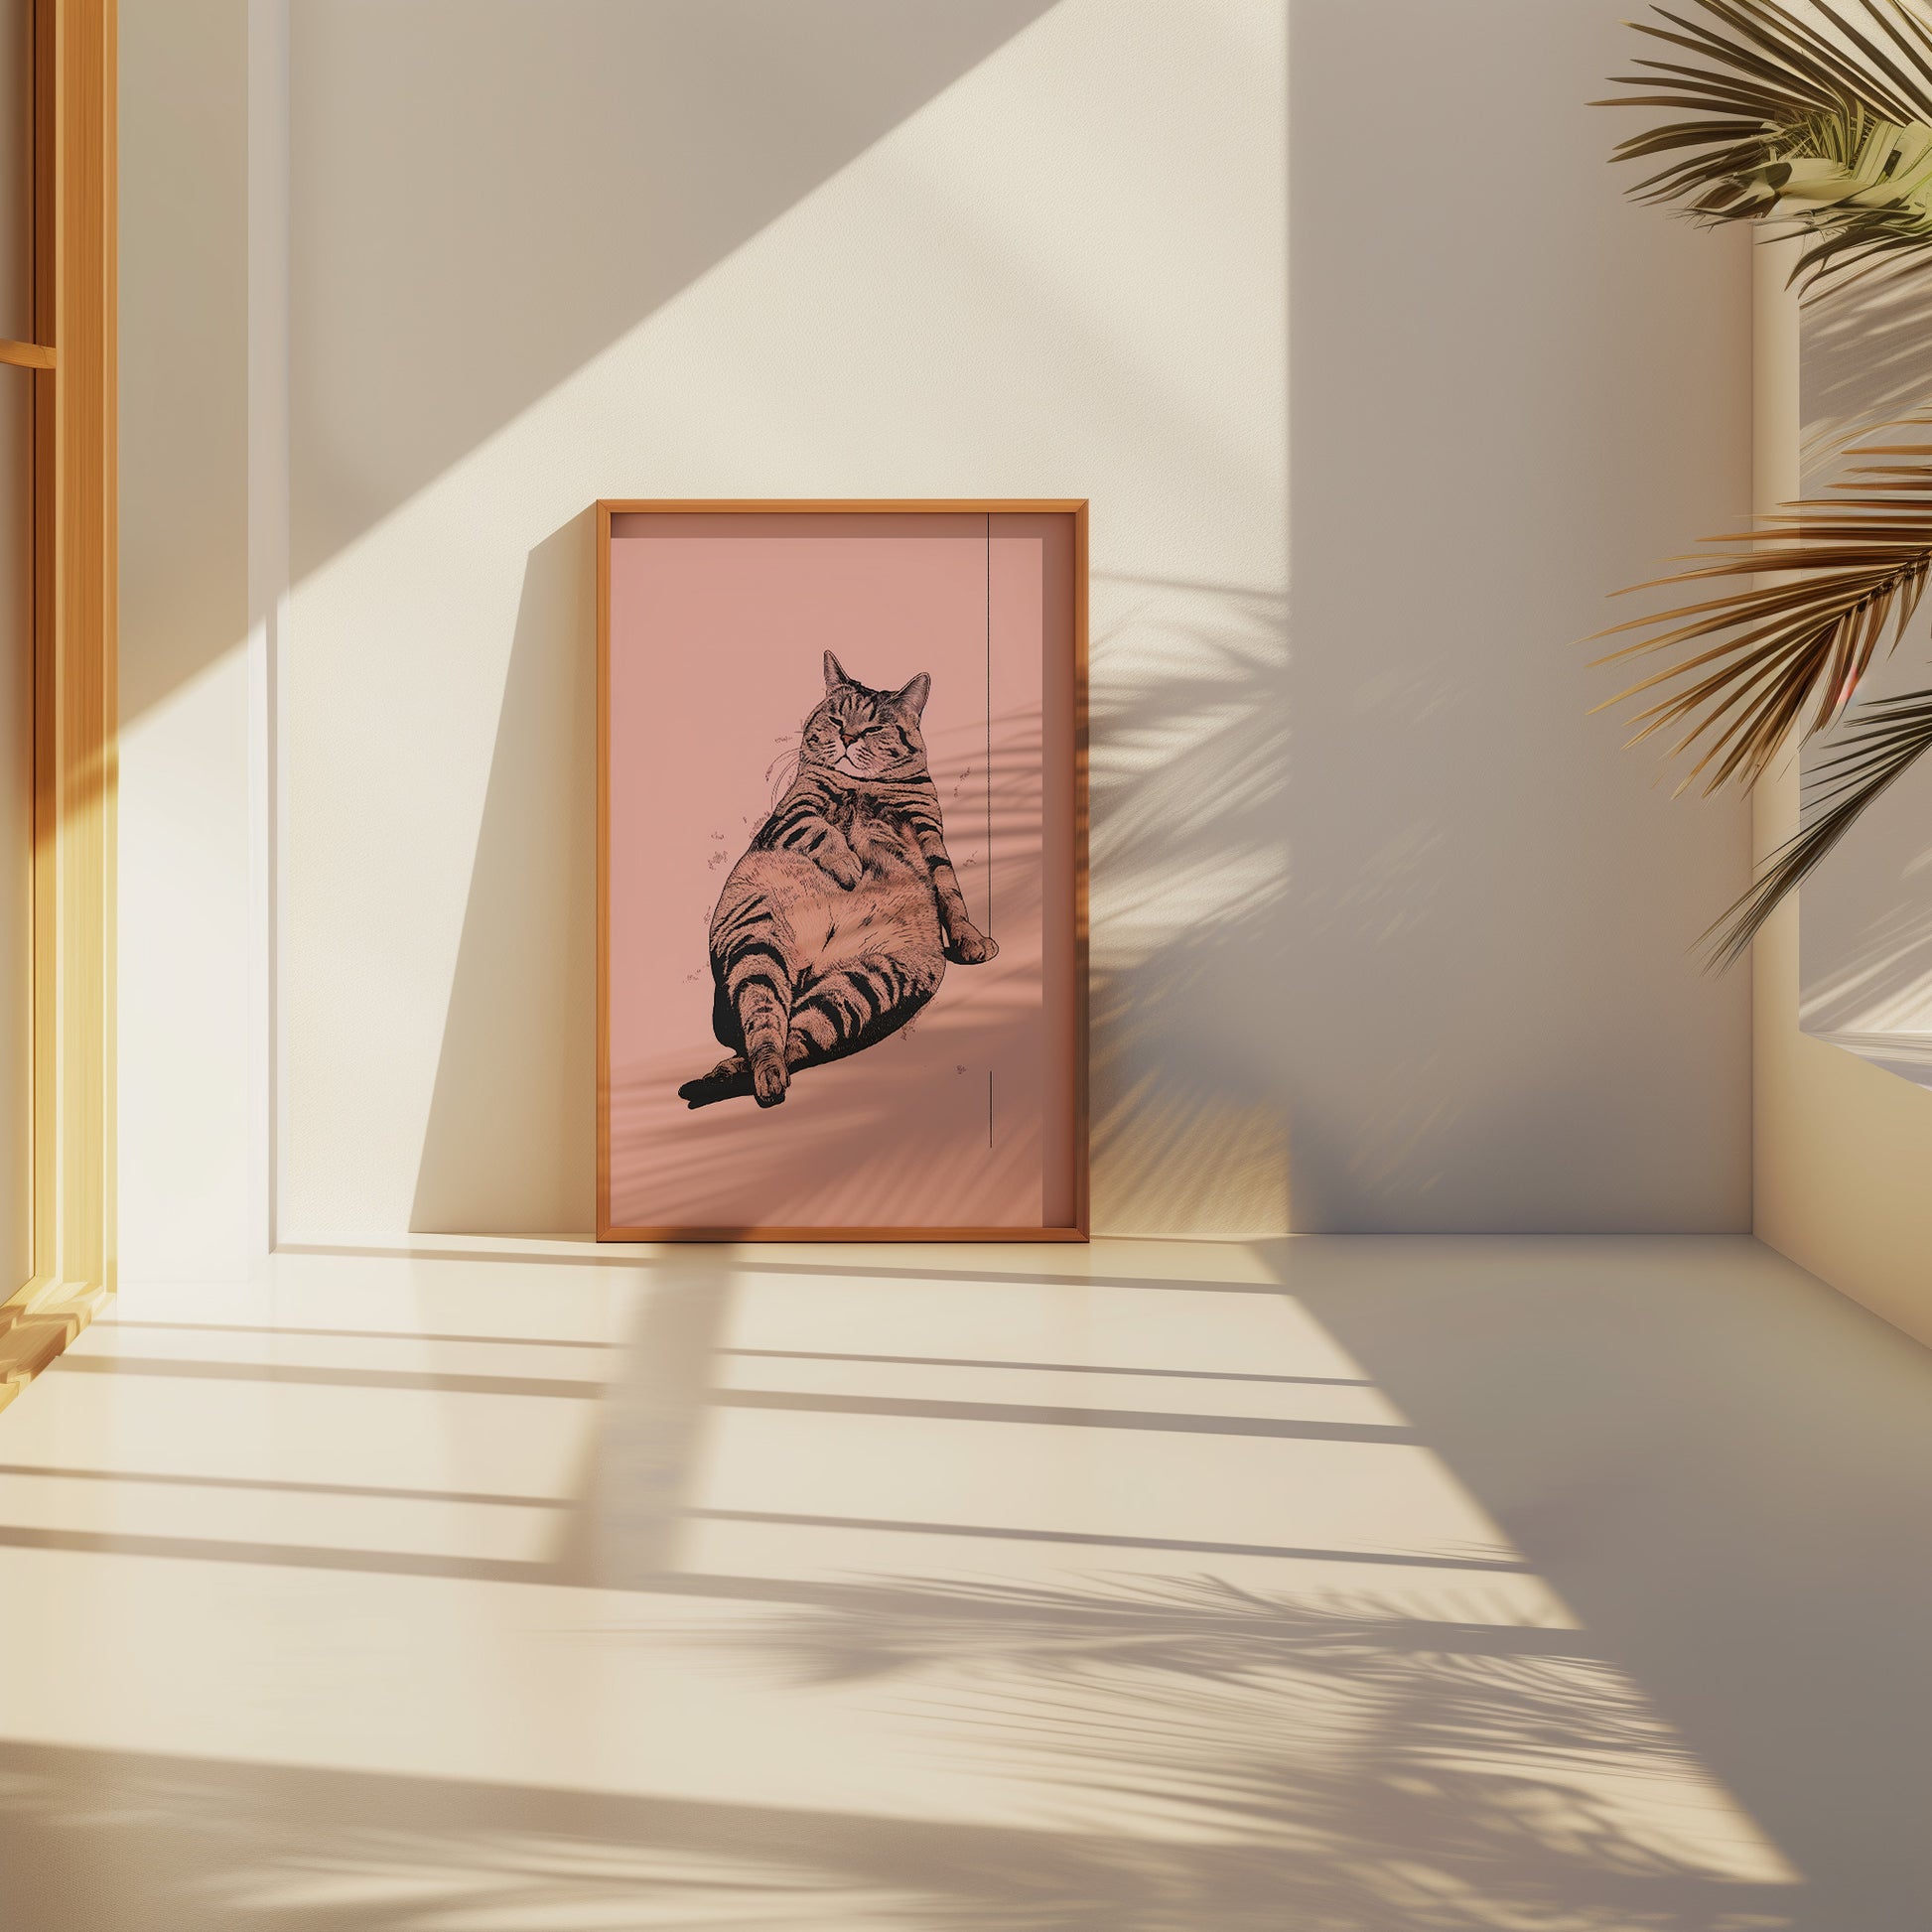 A framed illustration of a cat against a pink background in a room with sunlight and shadows.